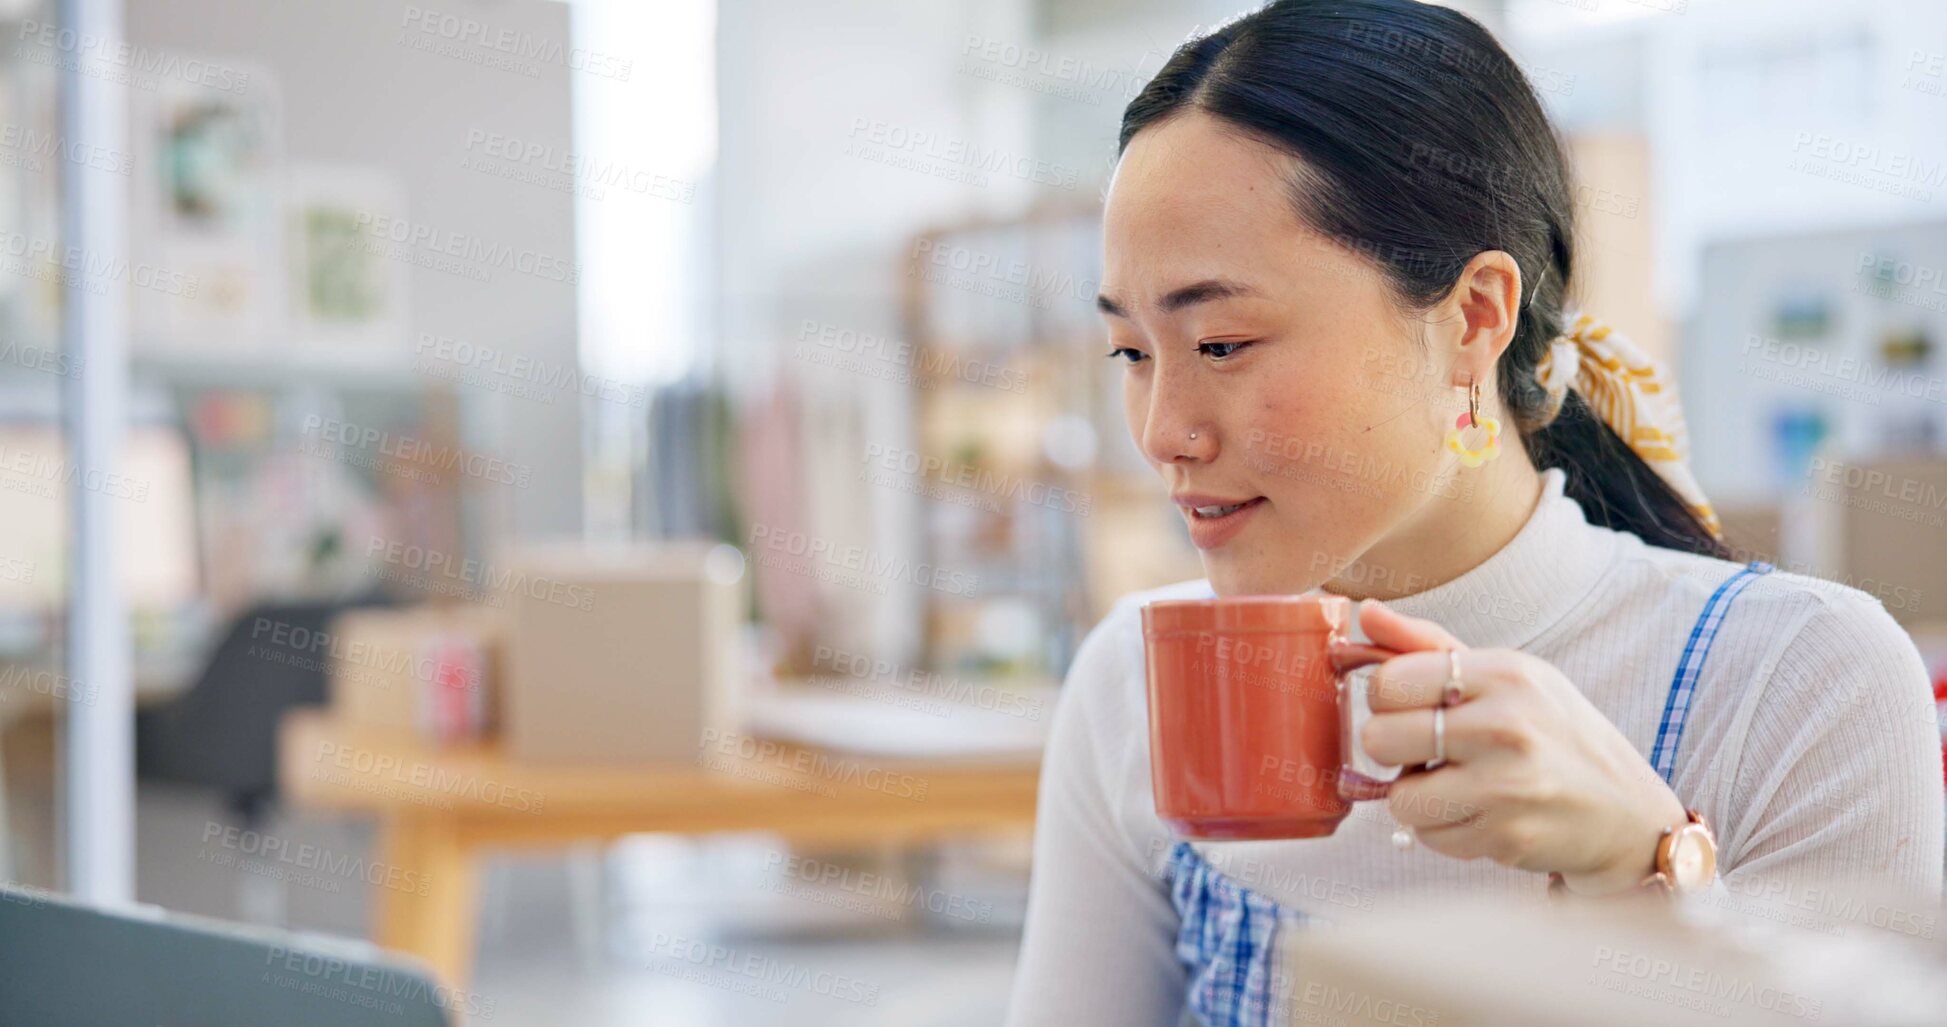 Buy stock photo Ecommerce, Asian woman at laptop with coffee and boxes, checking sales email or work at fashion startup. Online shopping, distribution and small business owner with drink, computer and review at desk